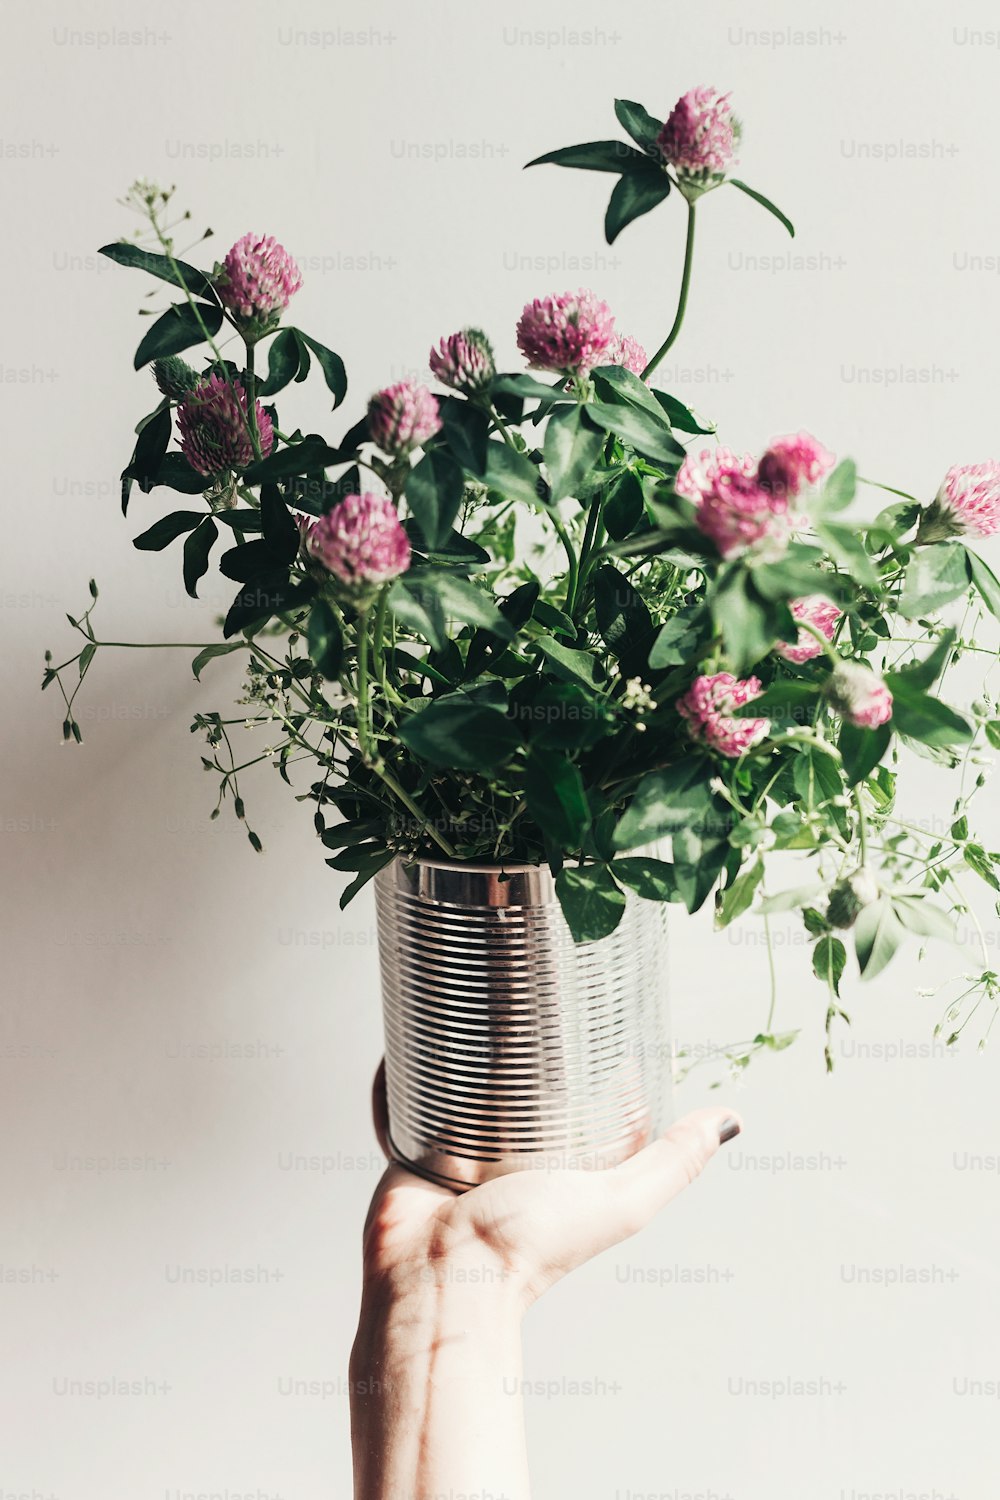 hand holding clover bouquet with pink flowers in metallic cane. wildflowers in rustic rural home. country slow living